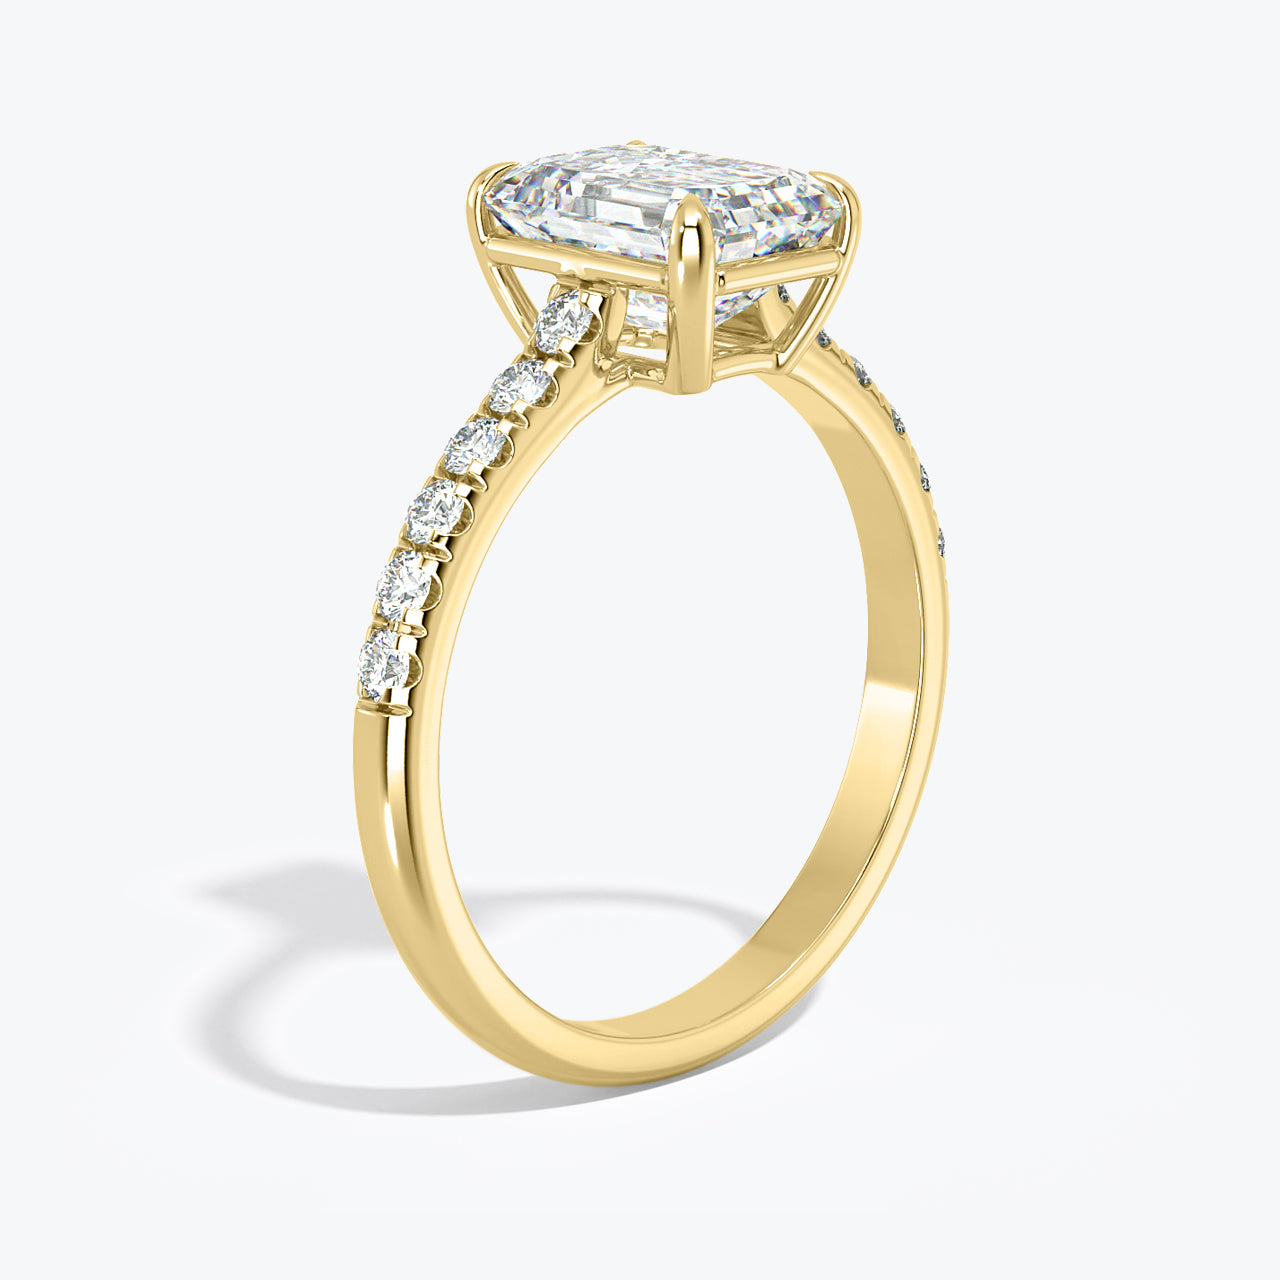 Lab-Created 2.50 Carat F-VS1 Emerald Cut Diamond Engagement Ring in 14k White Gold